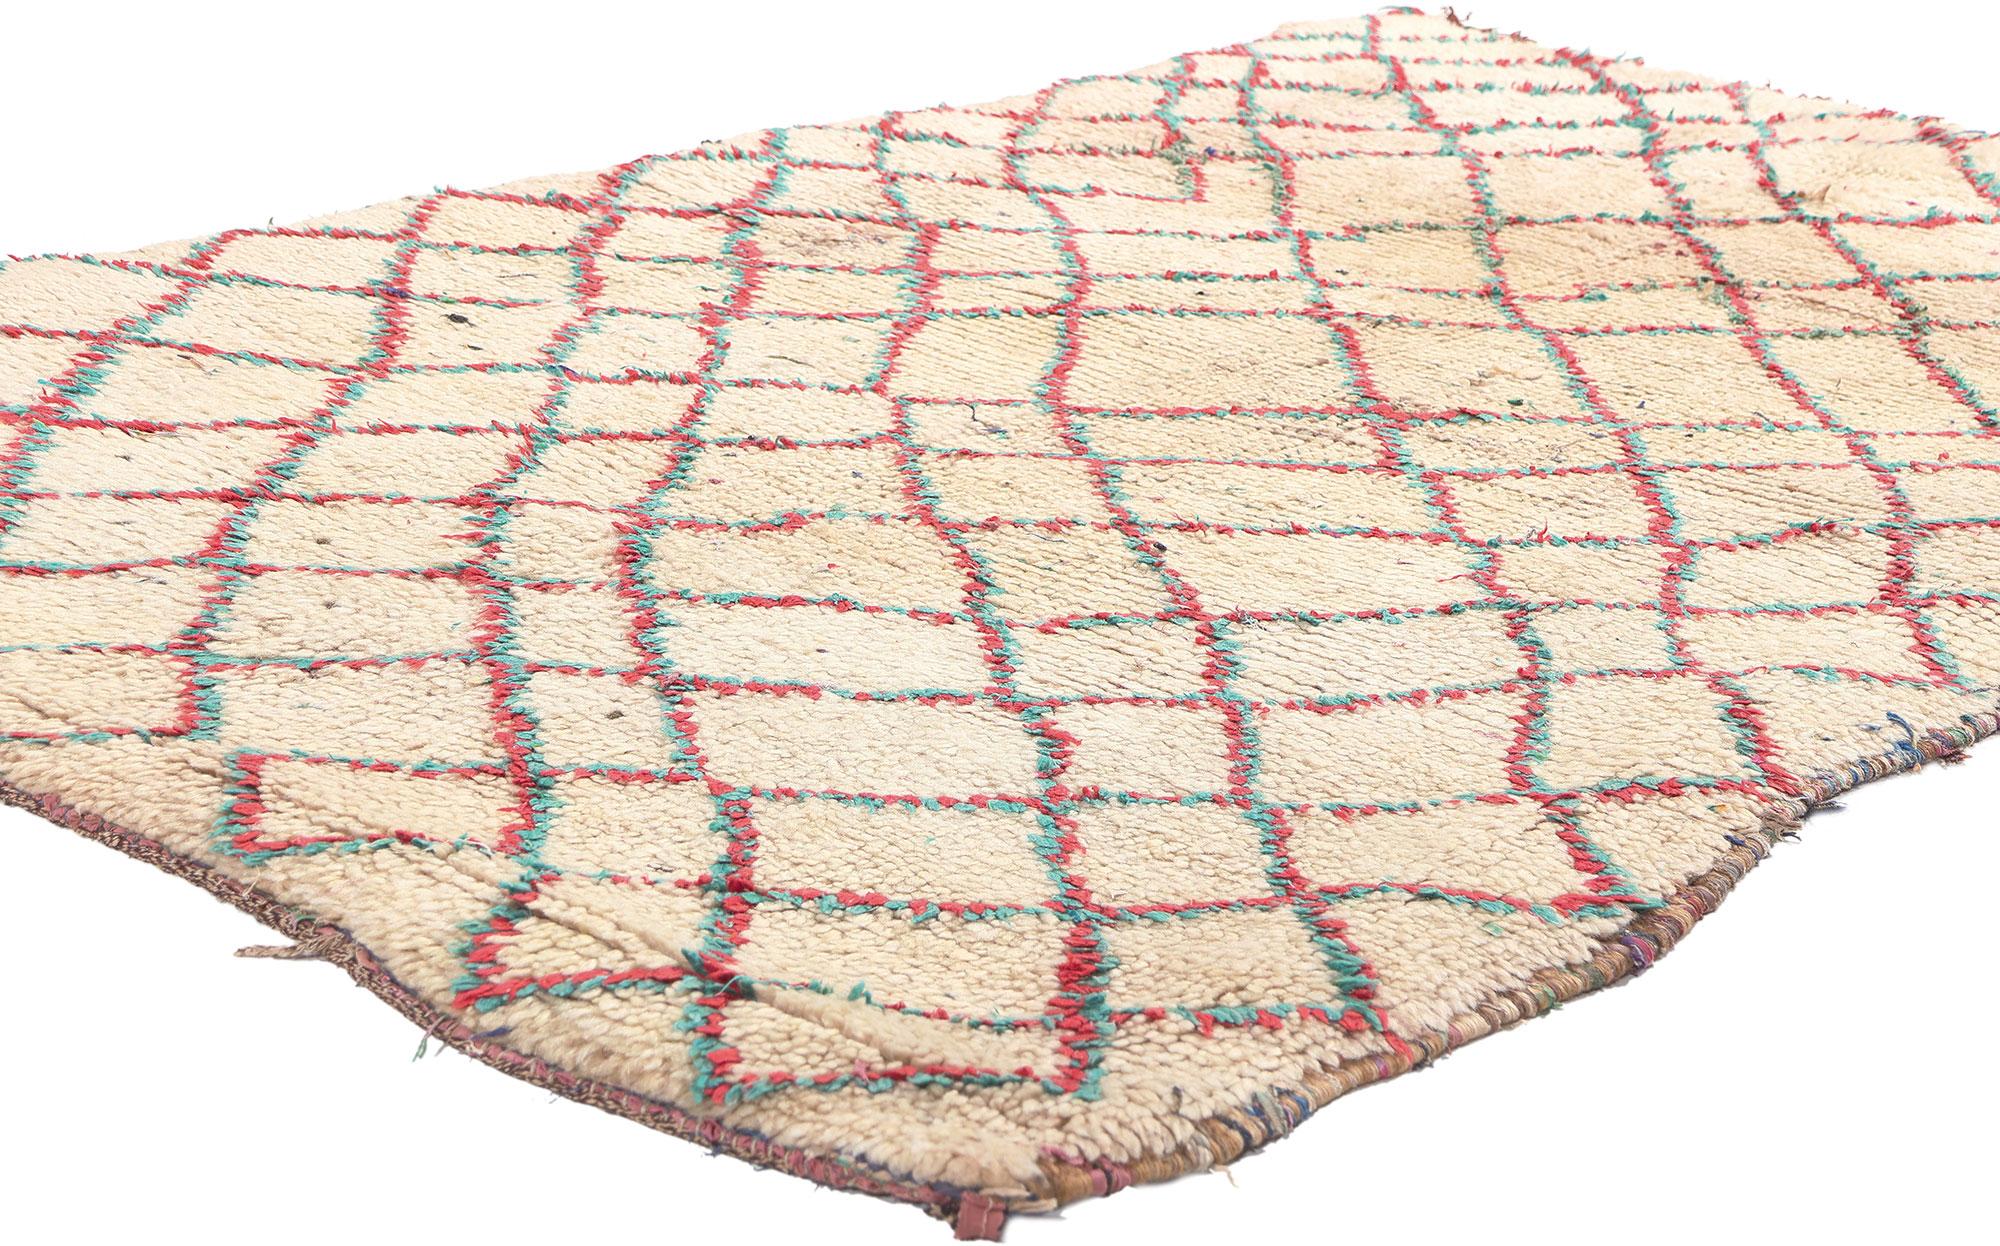 74819 Vintage Boucherouite Moroccan Rag Rug, 03'05 x 05'10. Embracing the tenets of sustainable interior design, this Boucherouite rug, hailing from the Atlas Mountains of Morocco, stands as a testament to the eco-conscious artistry of Berber women.